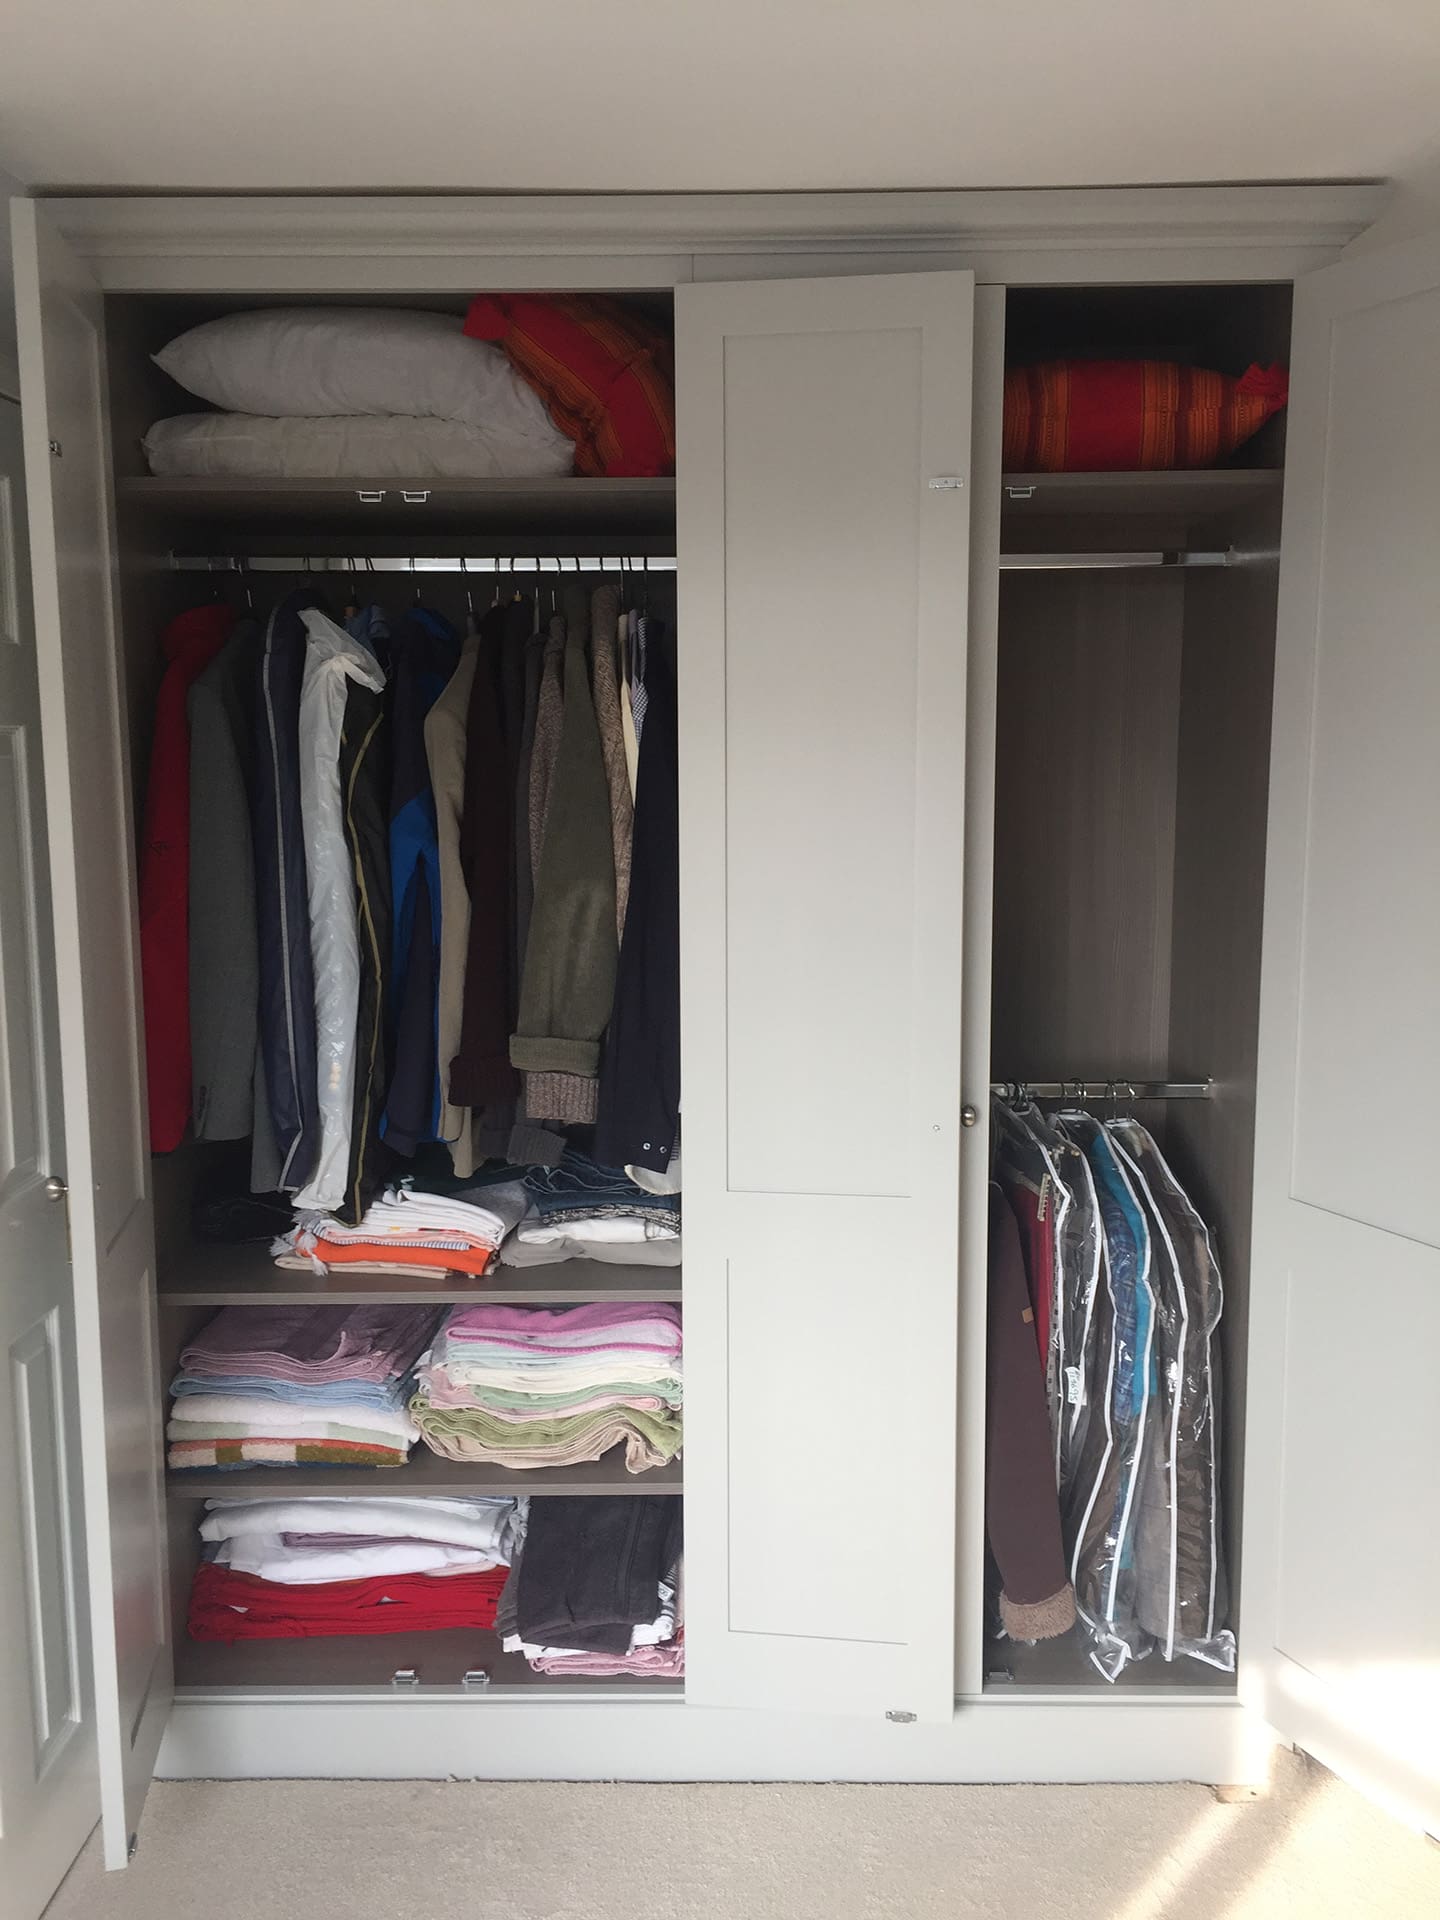 Wardrobes open to reveal the clothes hanging inside.